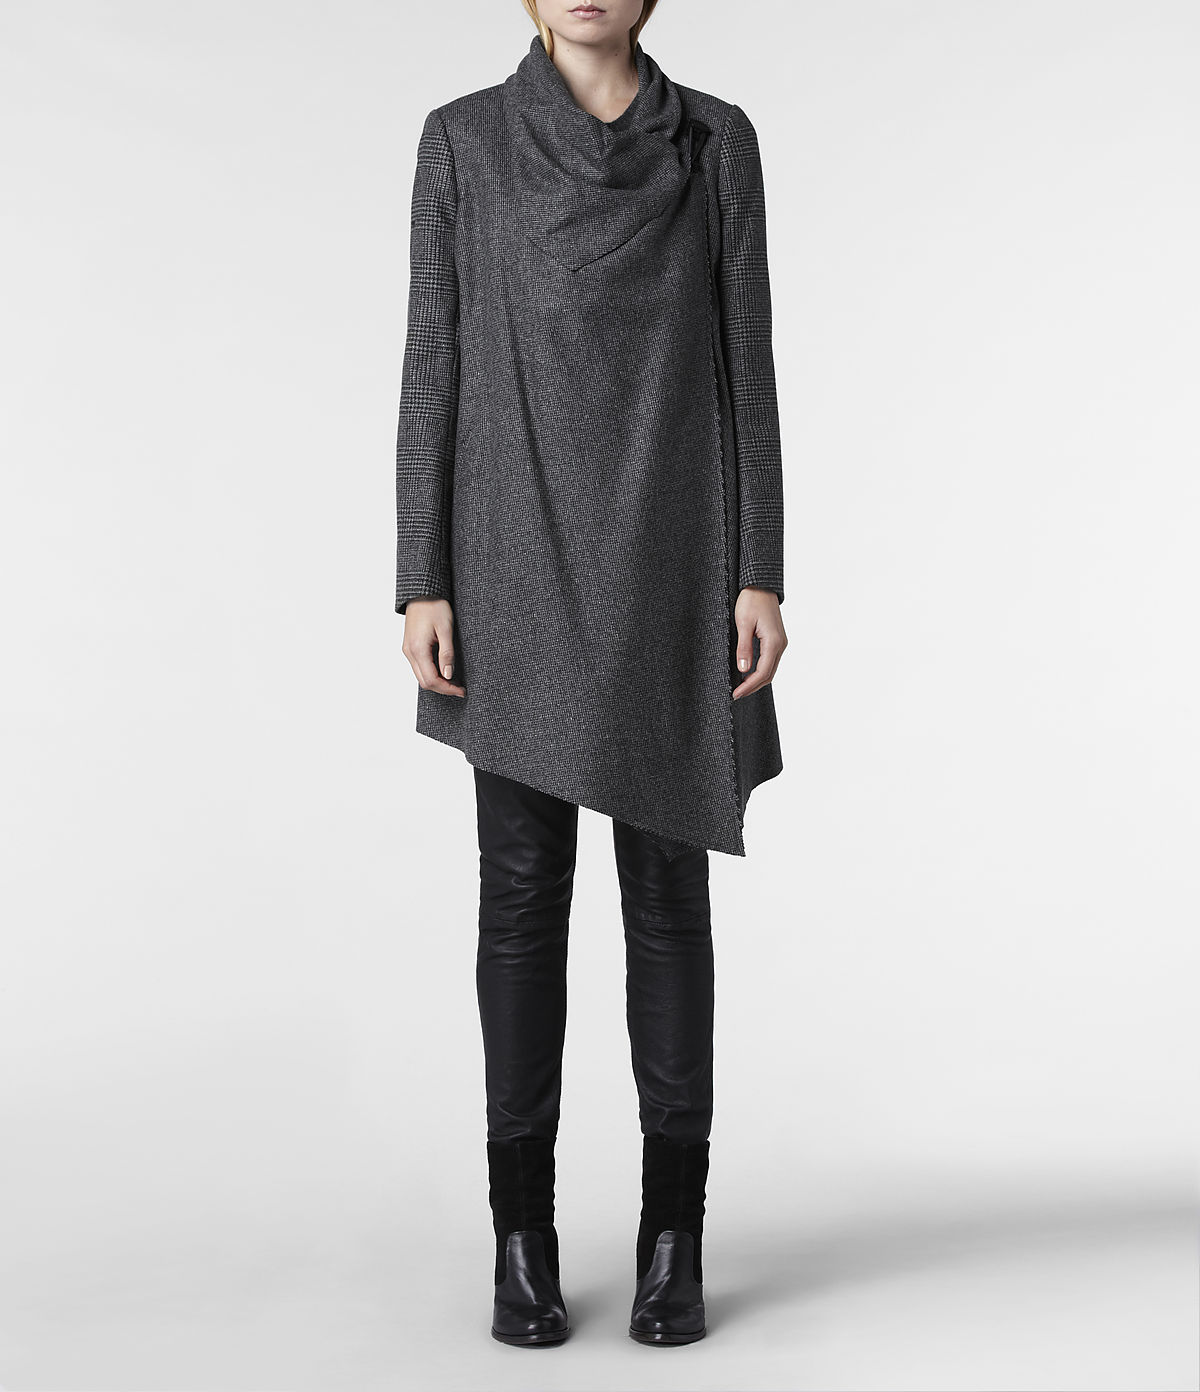 Lyst - Allsaints Check Monument Coat in Gray